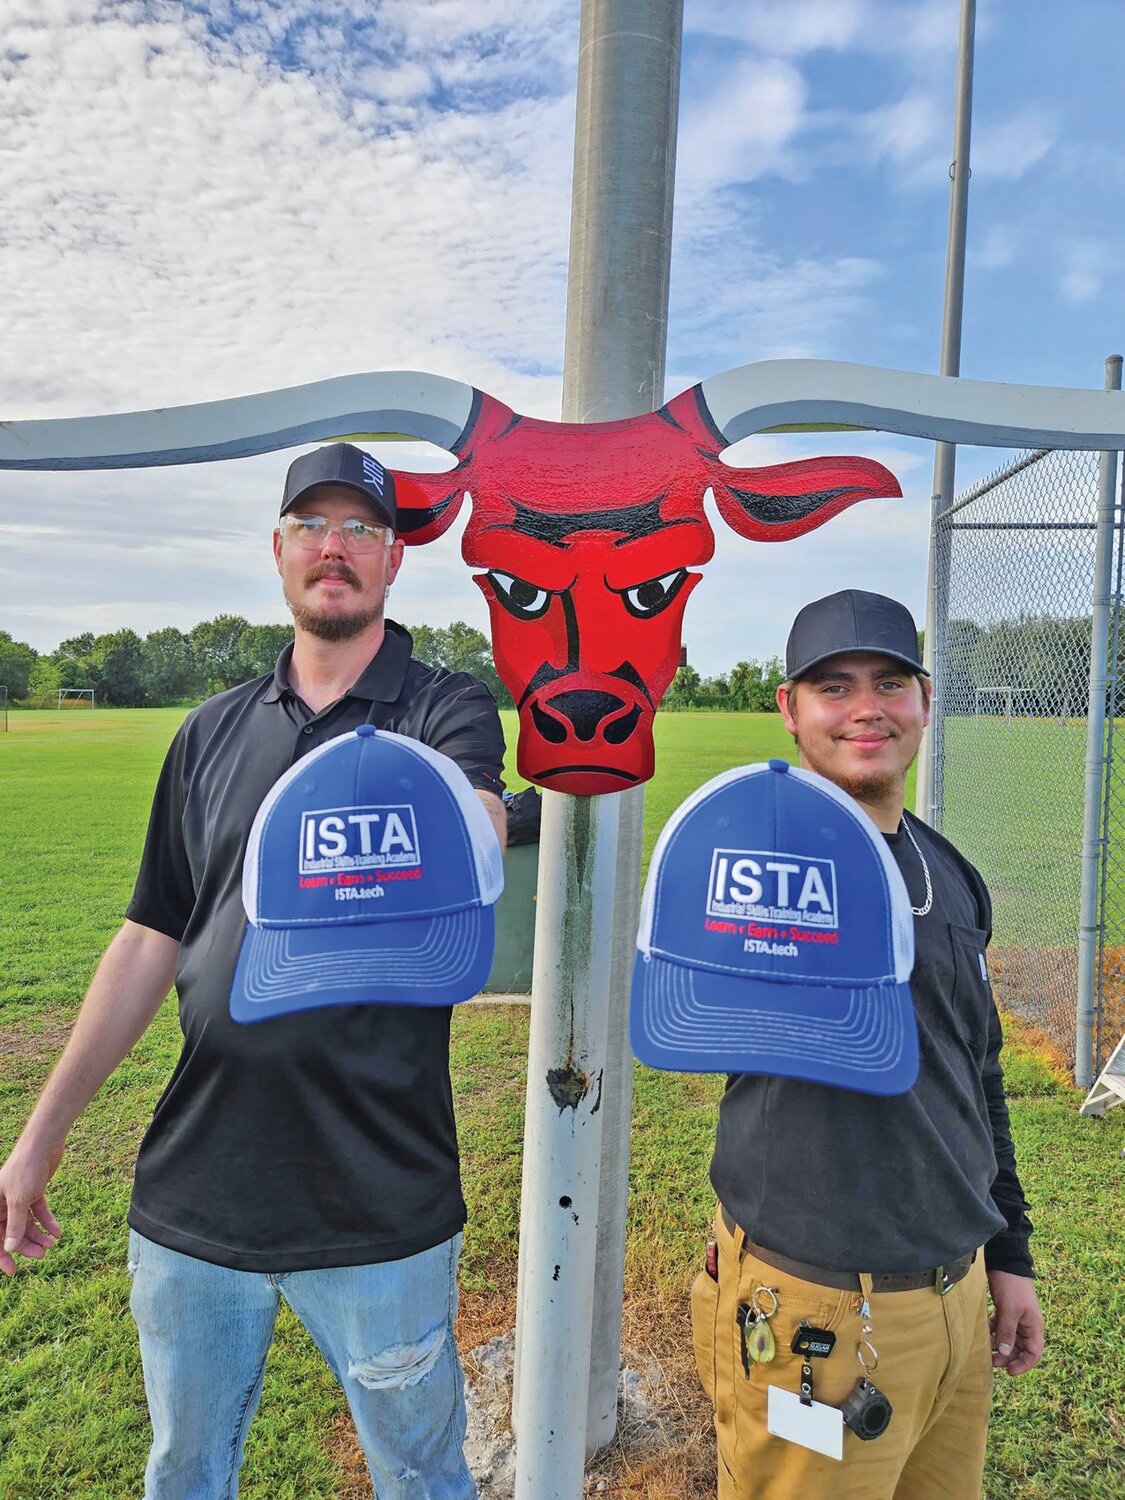 Jeremy Dean and Aveary Vargas proudly show off the welding skills they learned at the I.S.T.A.